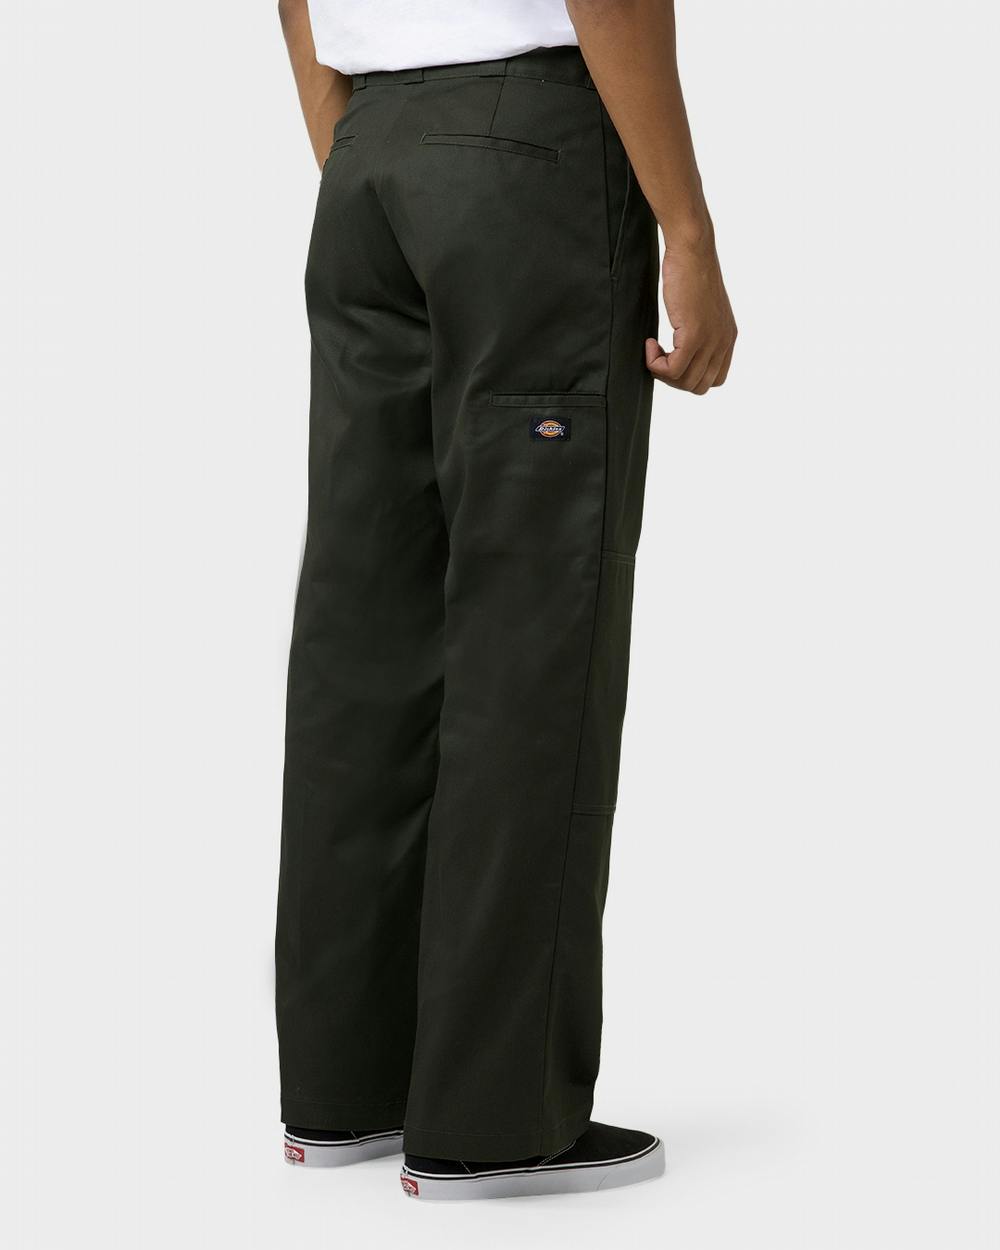 Dickies 85-283 Loose Fit Double Knee Pant - Olive Green